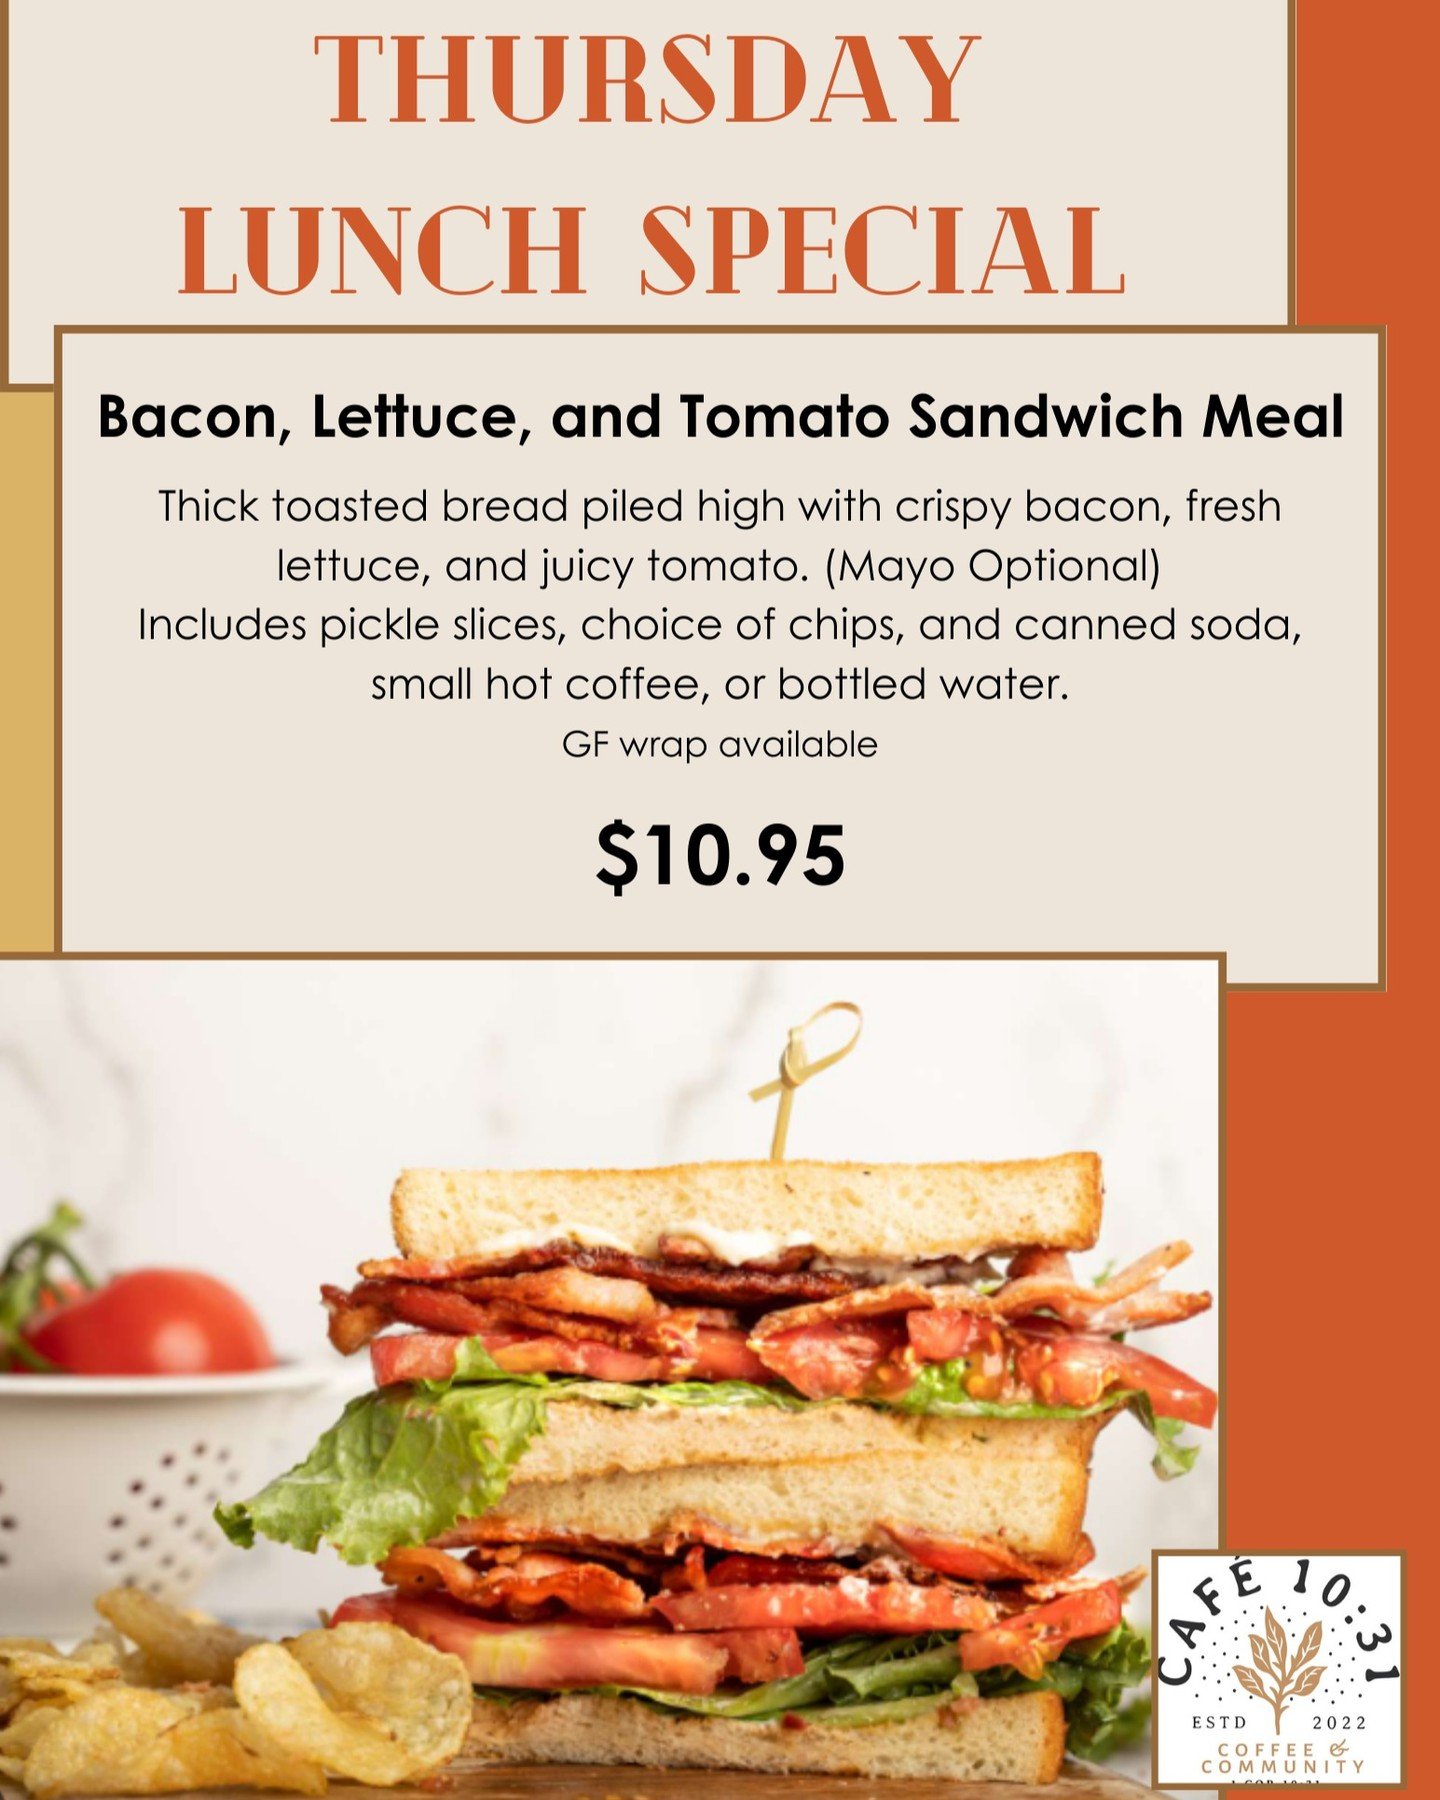 Just one day away!!!! 

#cafe1031de #lifehousemot #middletown #townsend #delaware #coffee #lunchspecial